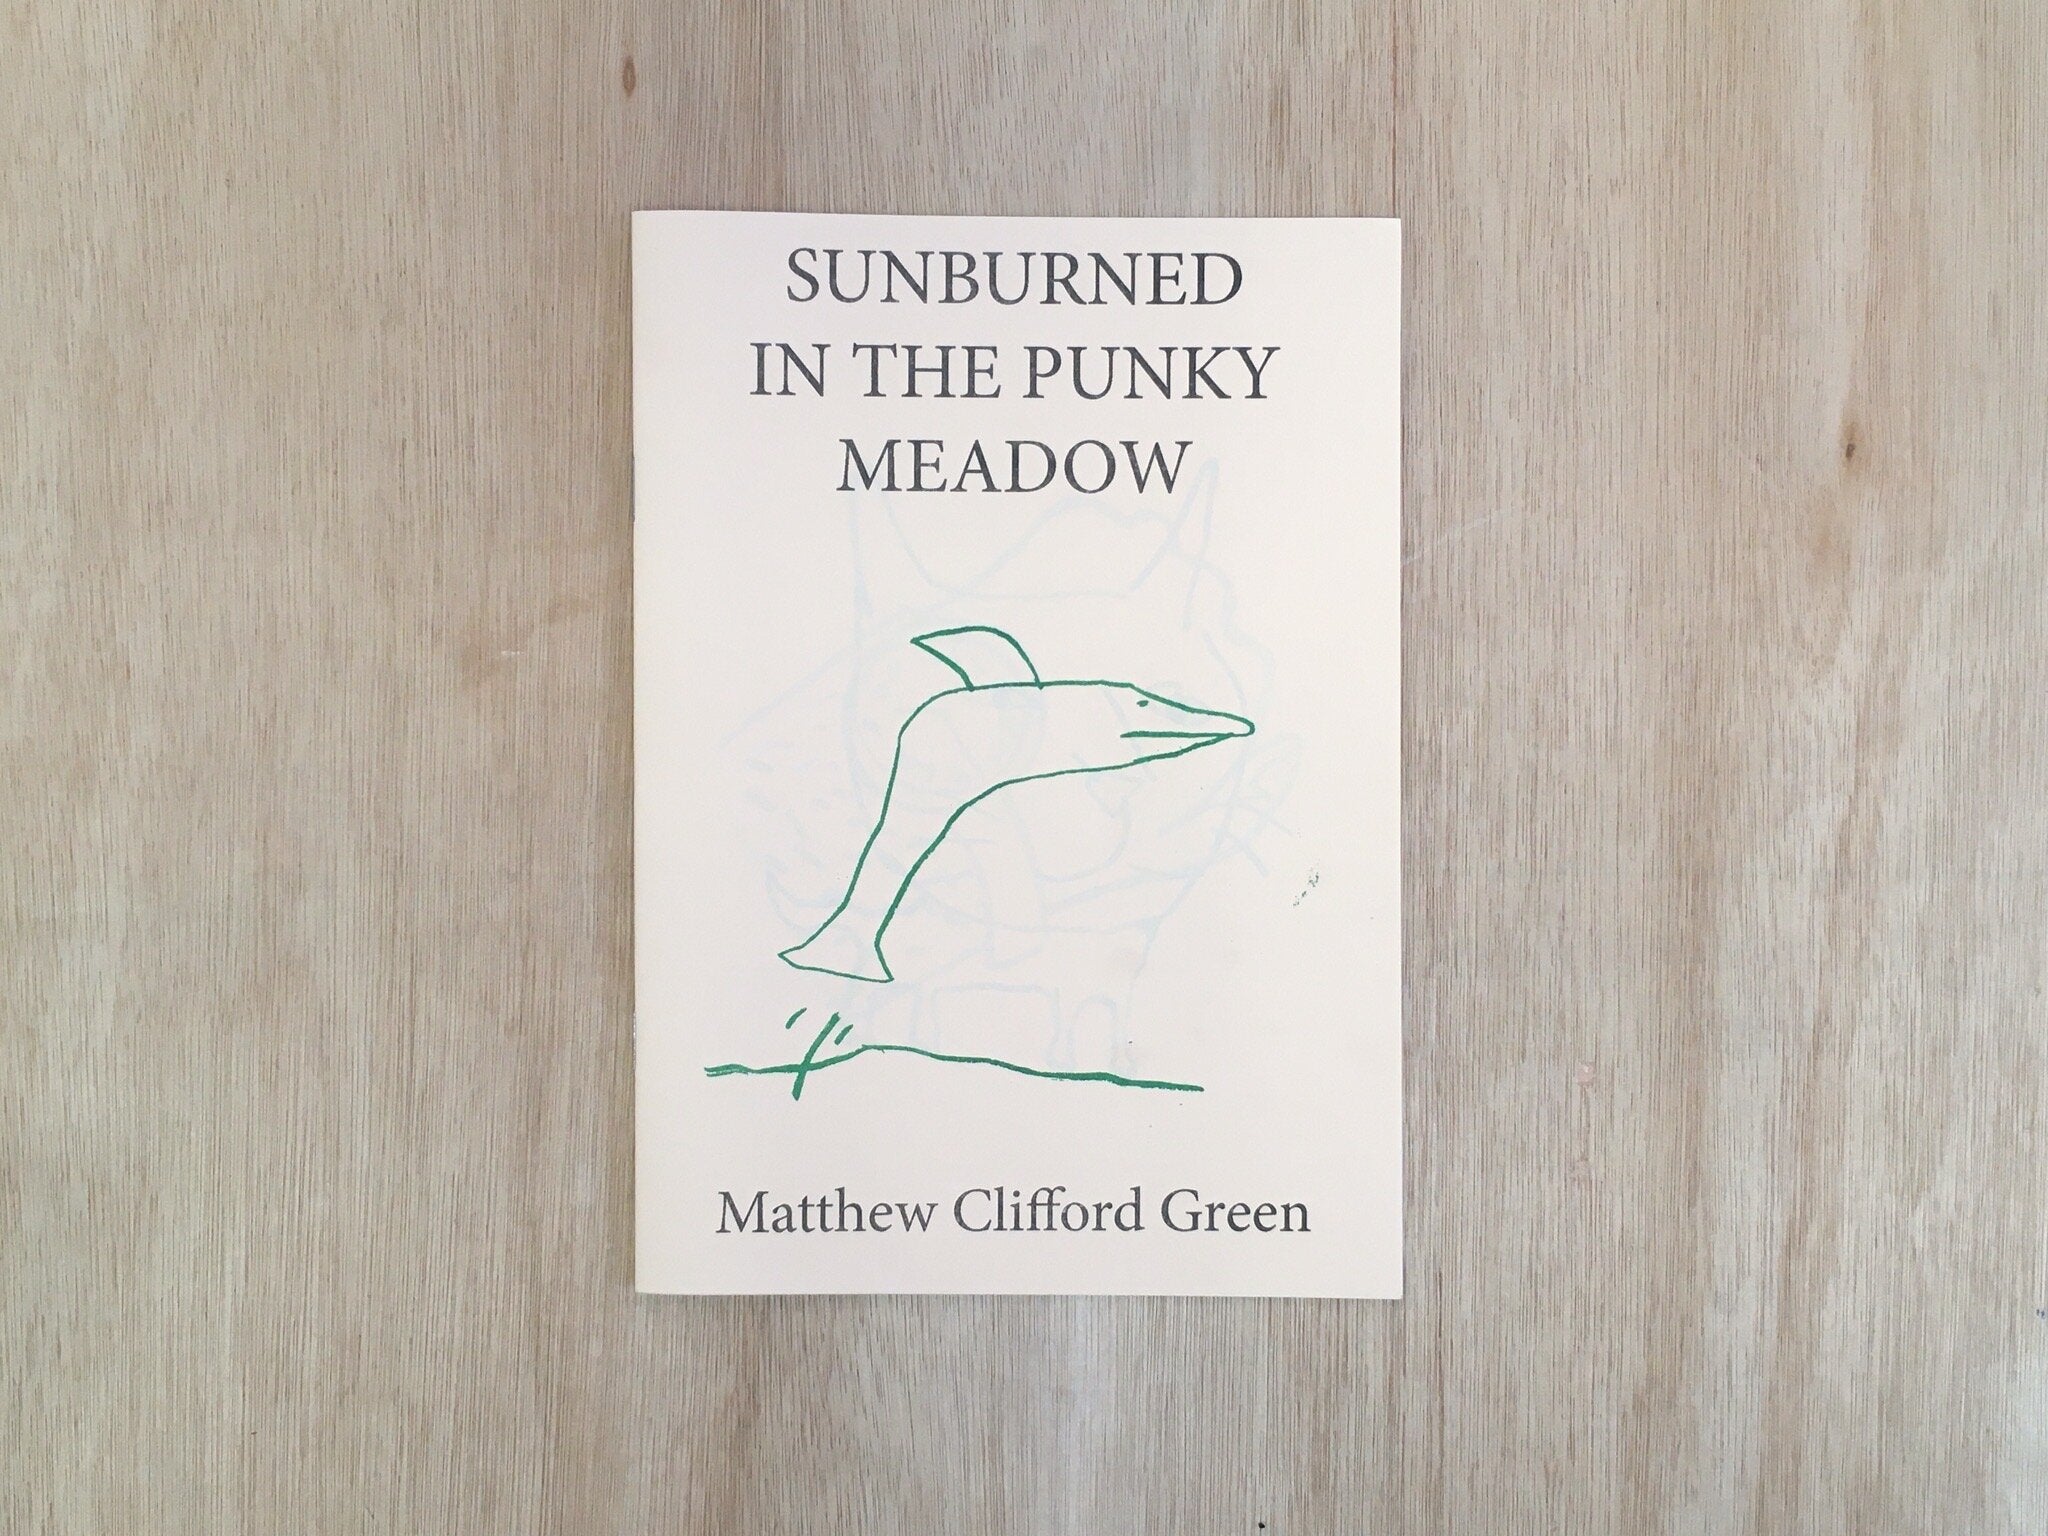 SUNBURNED IN THE PUNKY MEADOW by Matthew Clifford Green